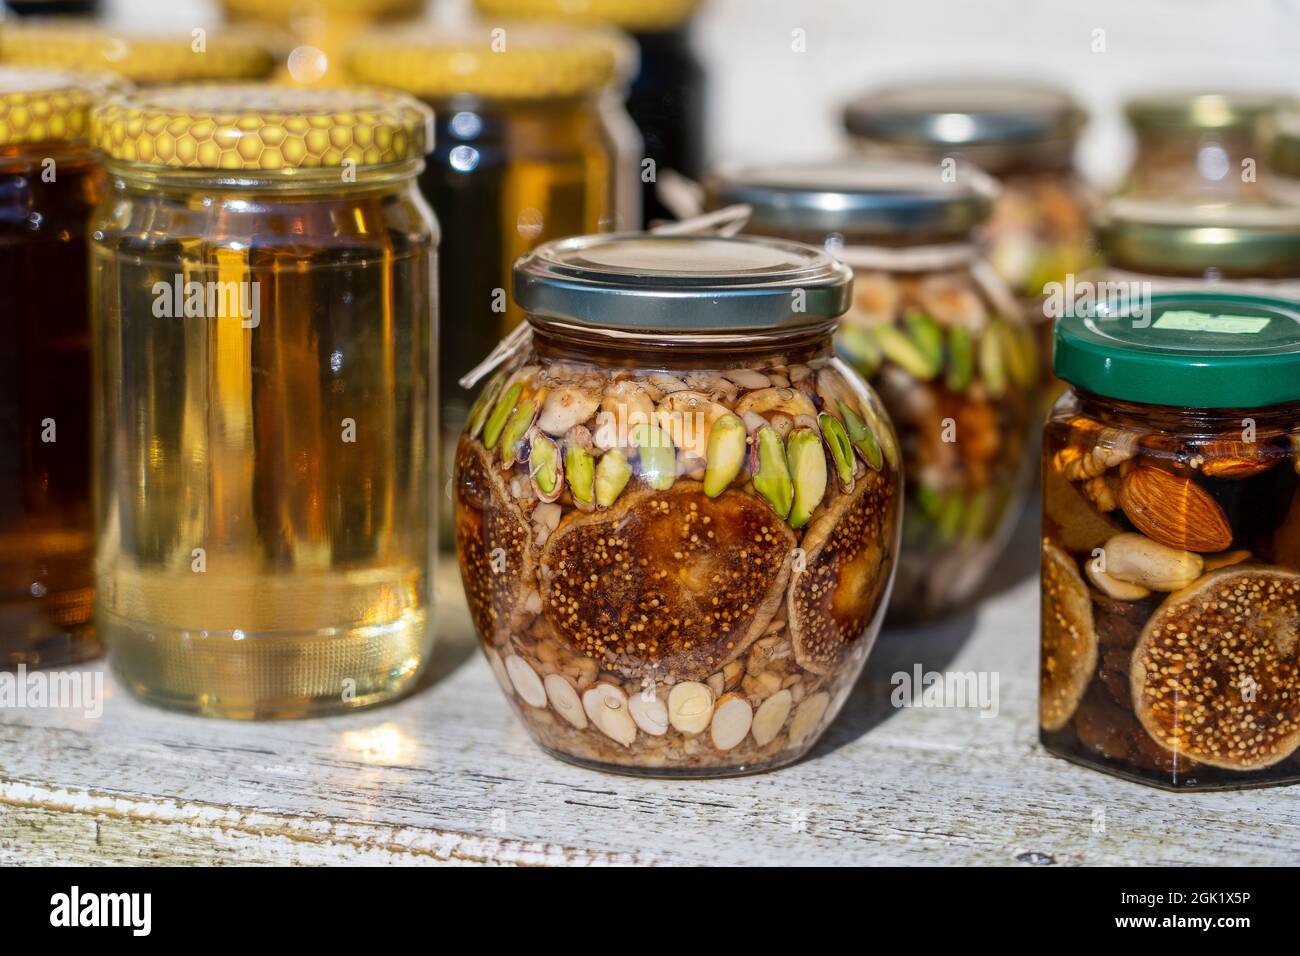 https://c8.alamy.com/comp/2GK1X5P/honey-in-a-glass-jar-with-nuts-and-fruits-for-sell-for-tourist-in-montenegro-food-market-close-up-2GK1X5P.jpg